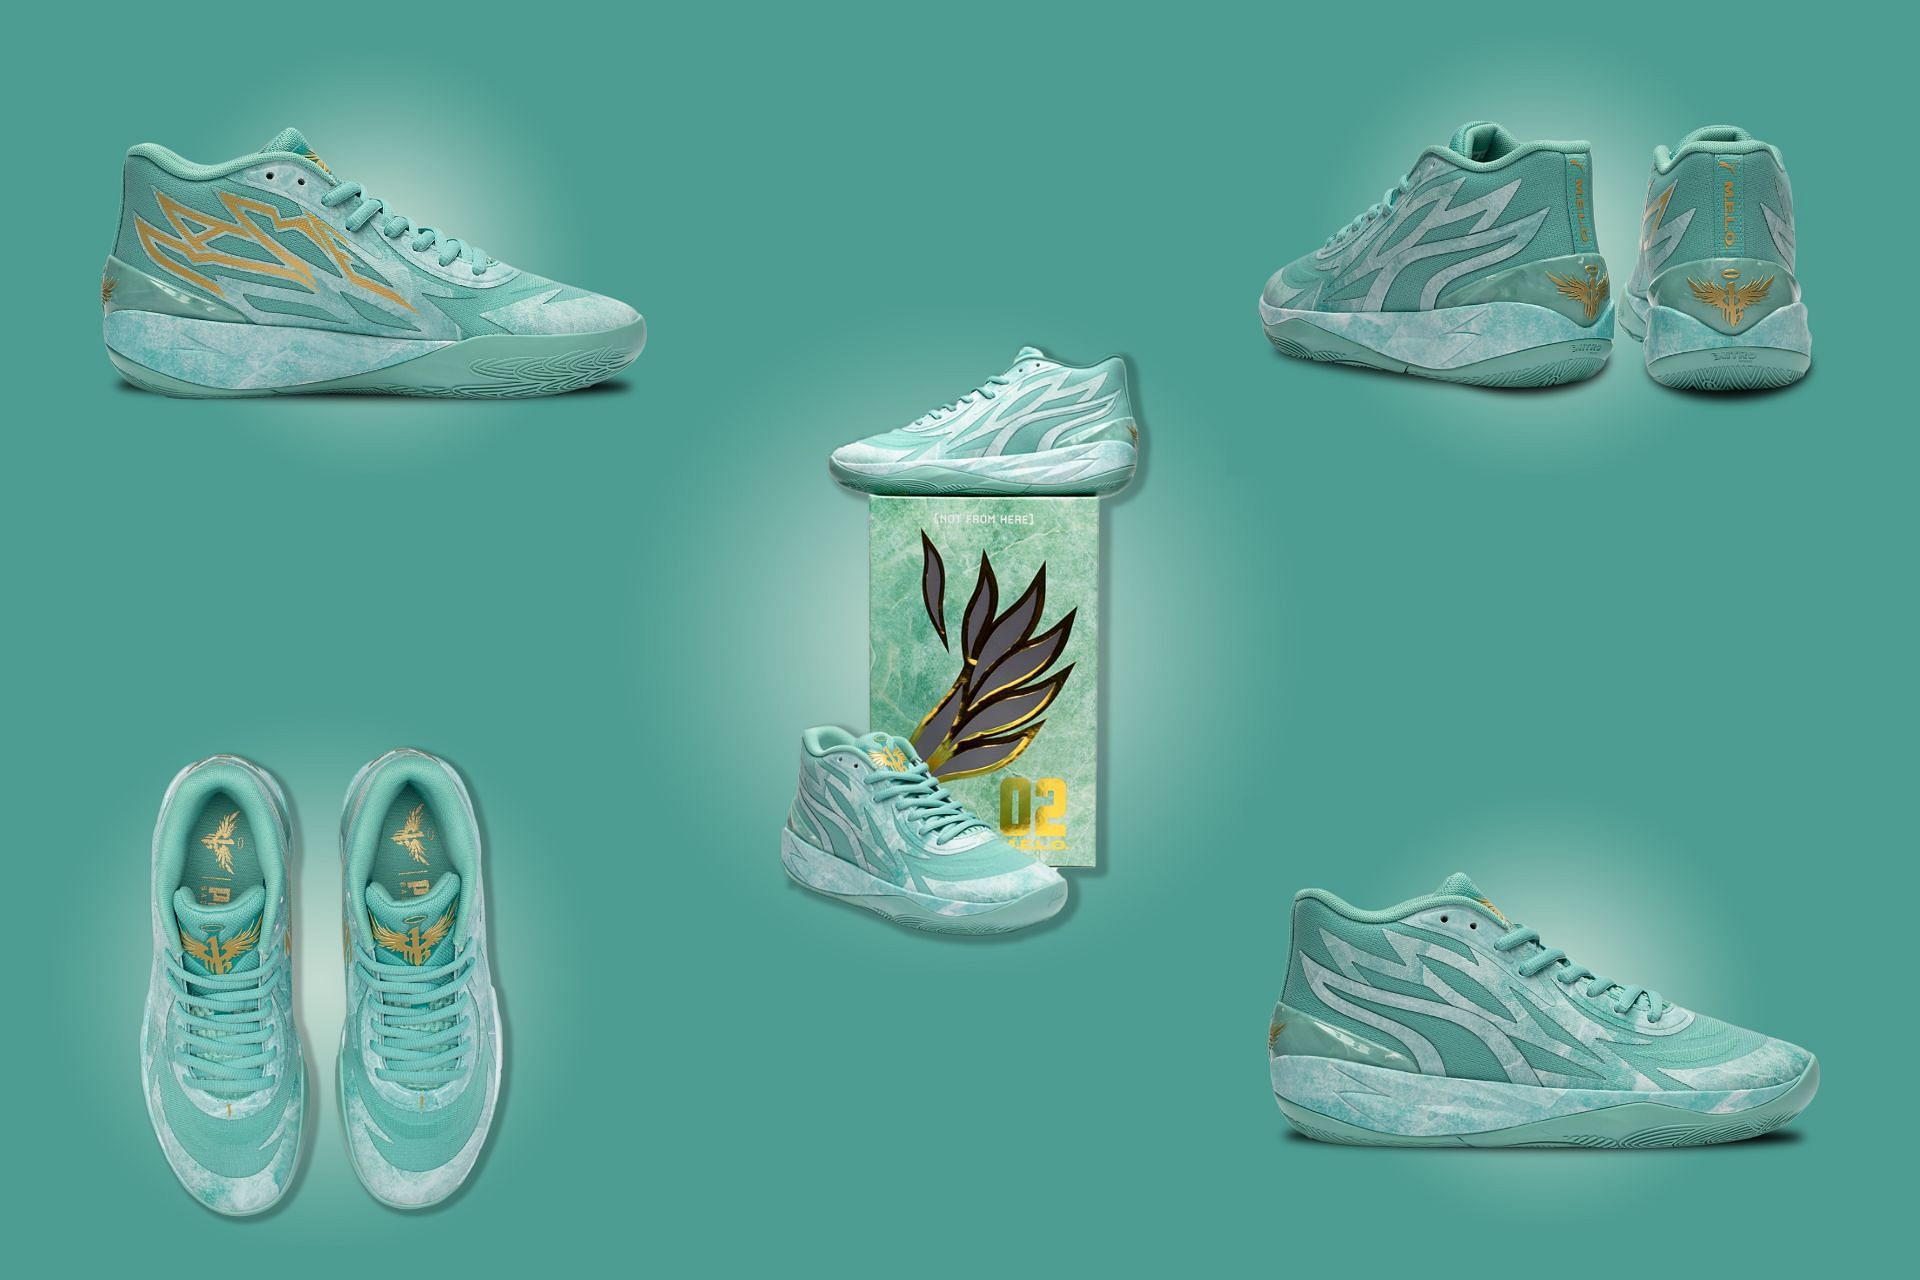 The upcoming Puma x LaMelo Ball MB.02 &quot;Jade Green&quot; sneakers are being released to honor the Chinese Lunar New Year (Image via Sportskeeda)